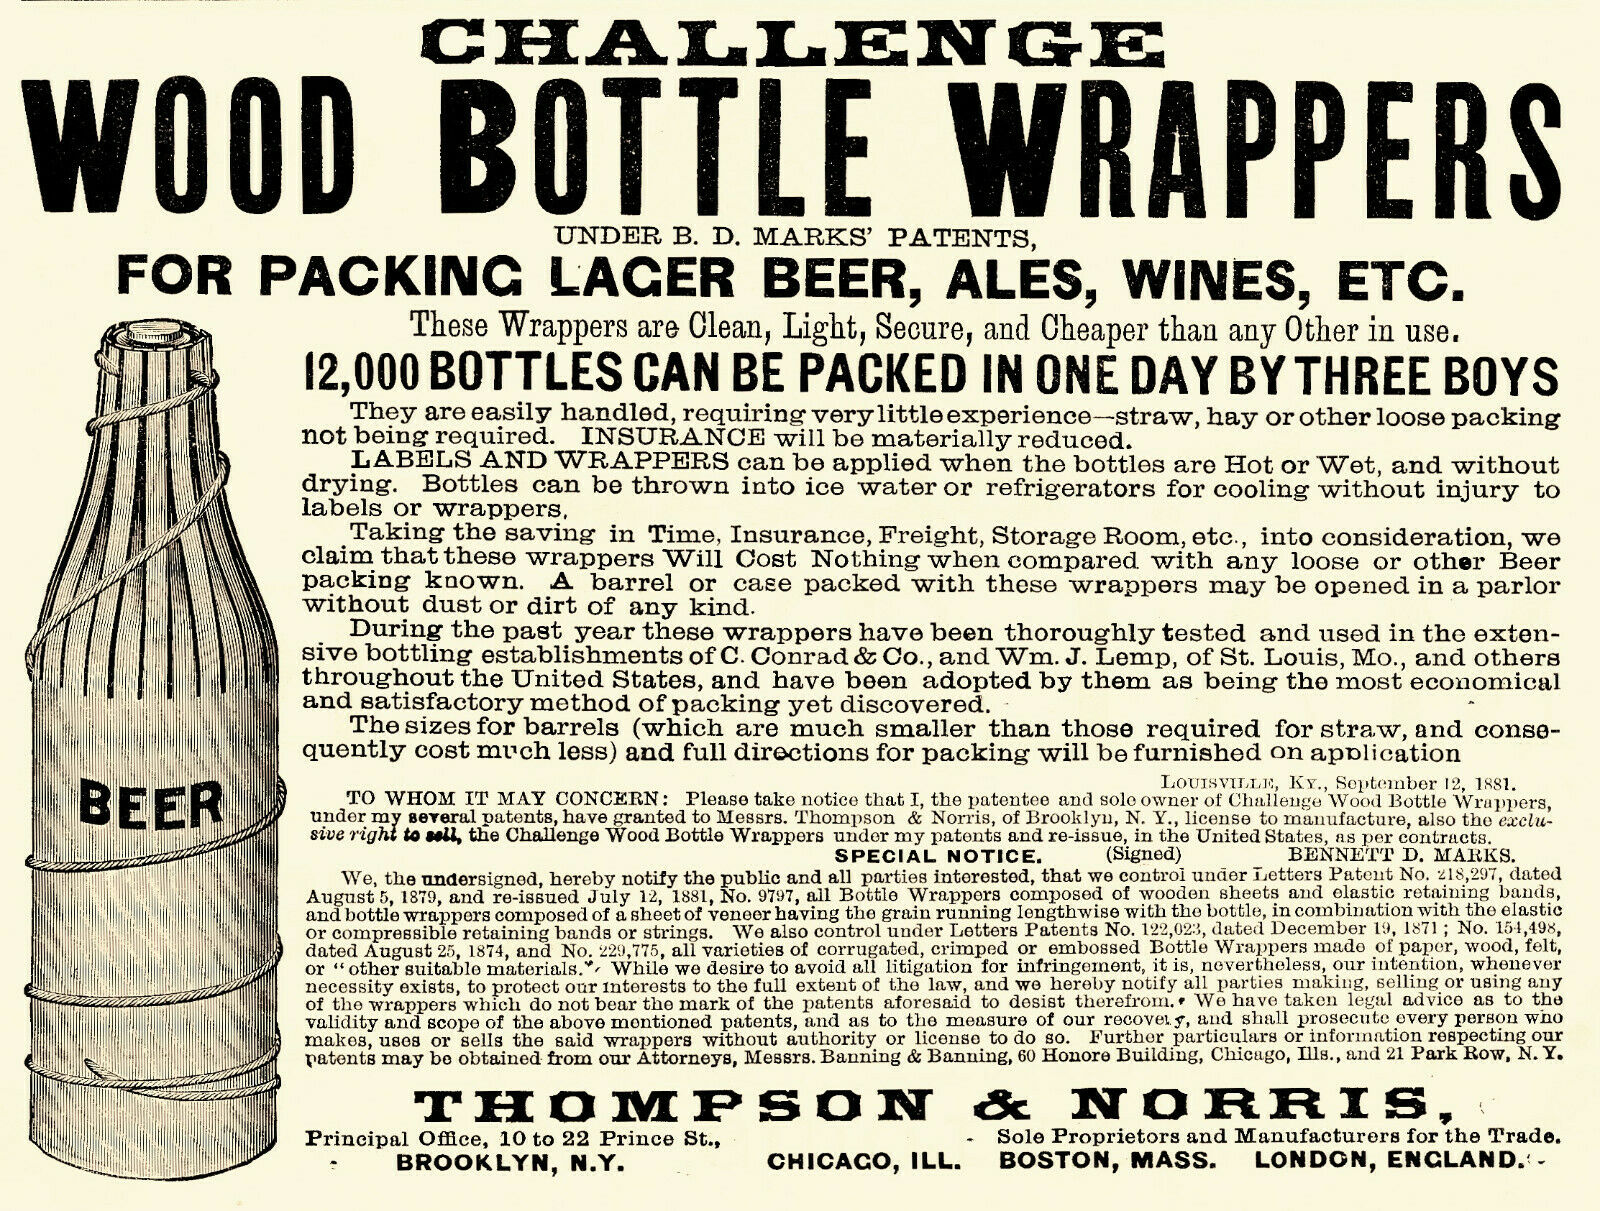 1878 Thompson & Norris Wood Beer Bottle Wrappers, Brooklyn, New York Prepro Ad